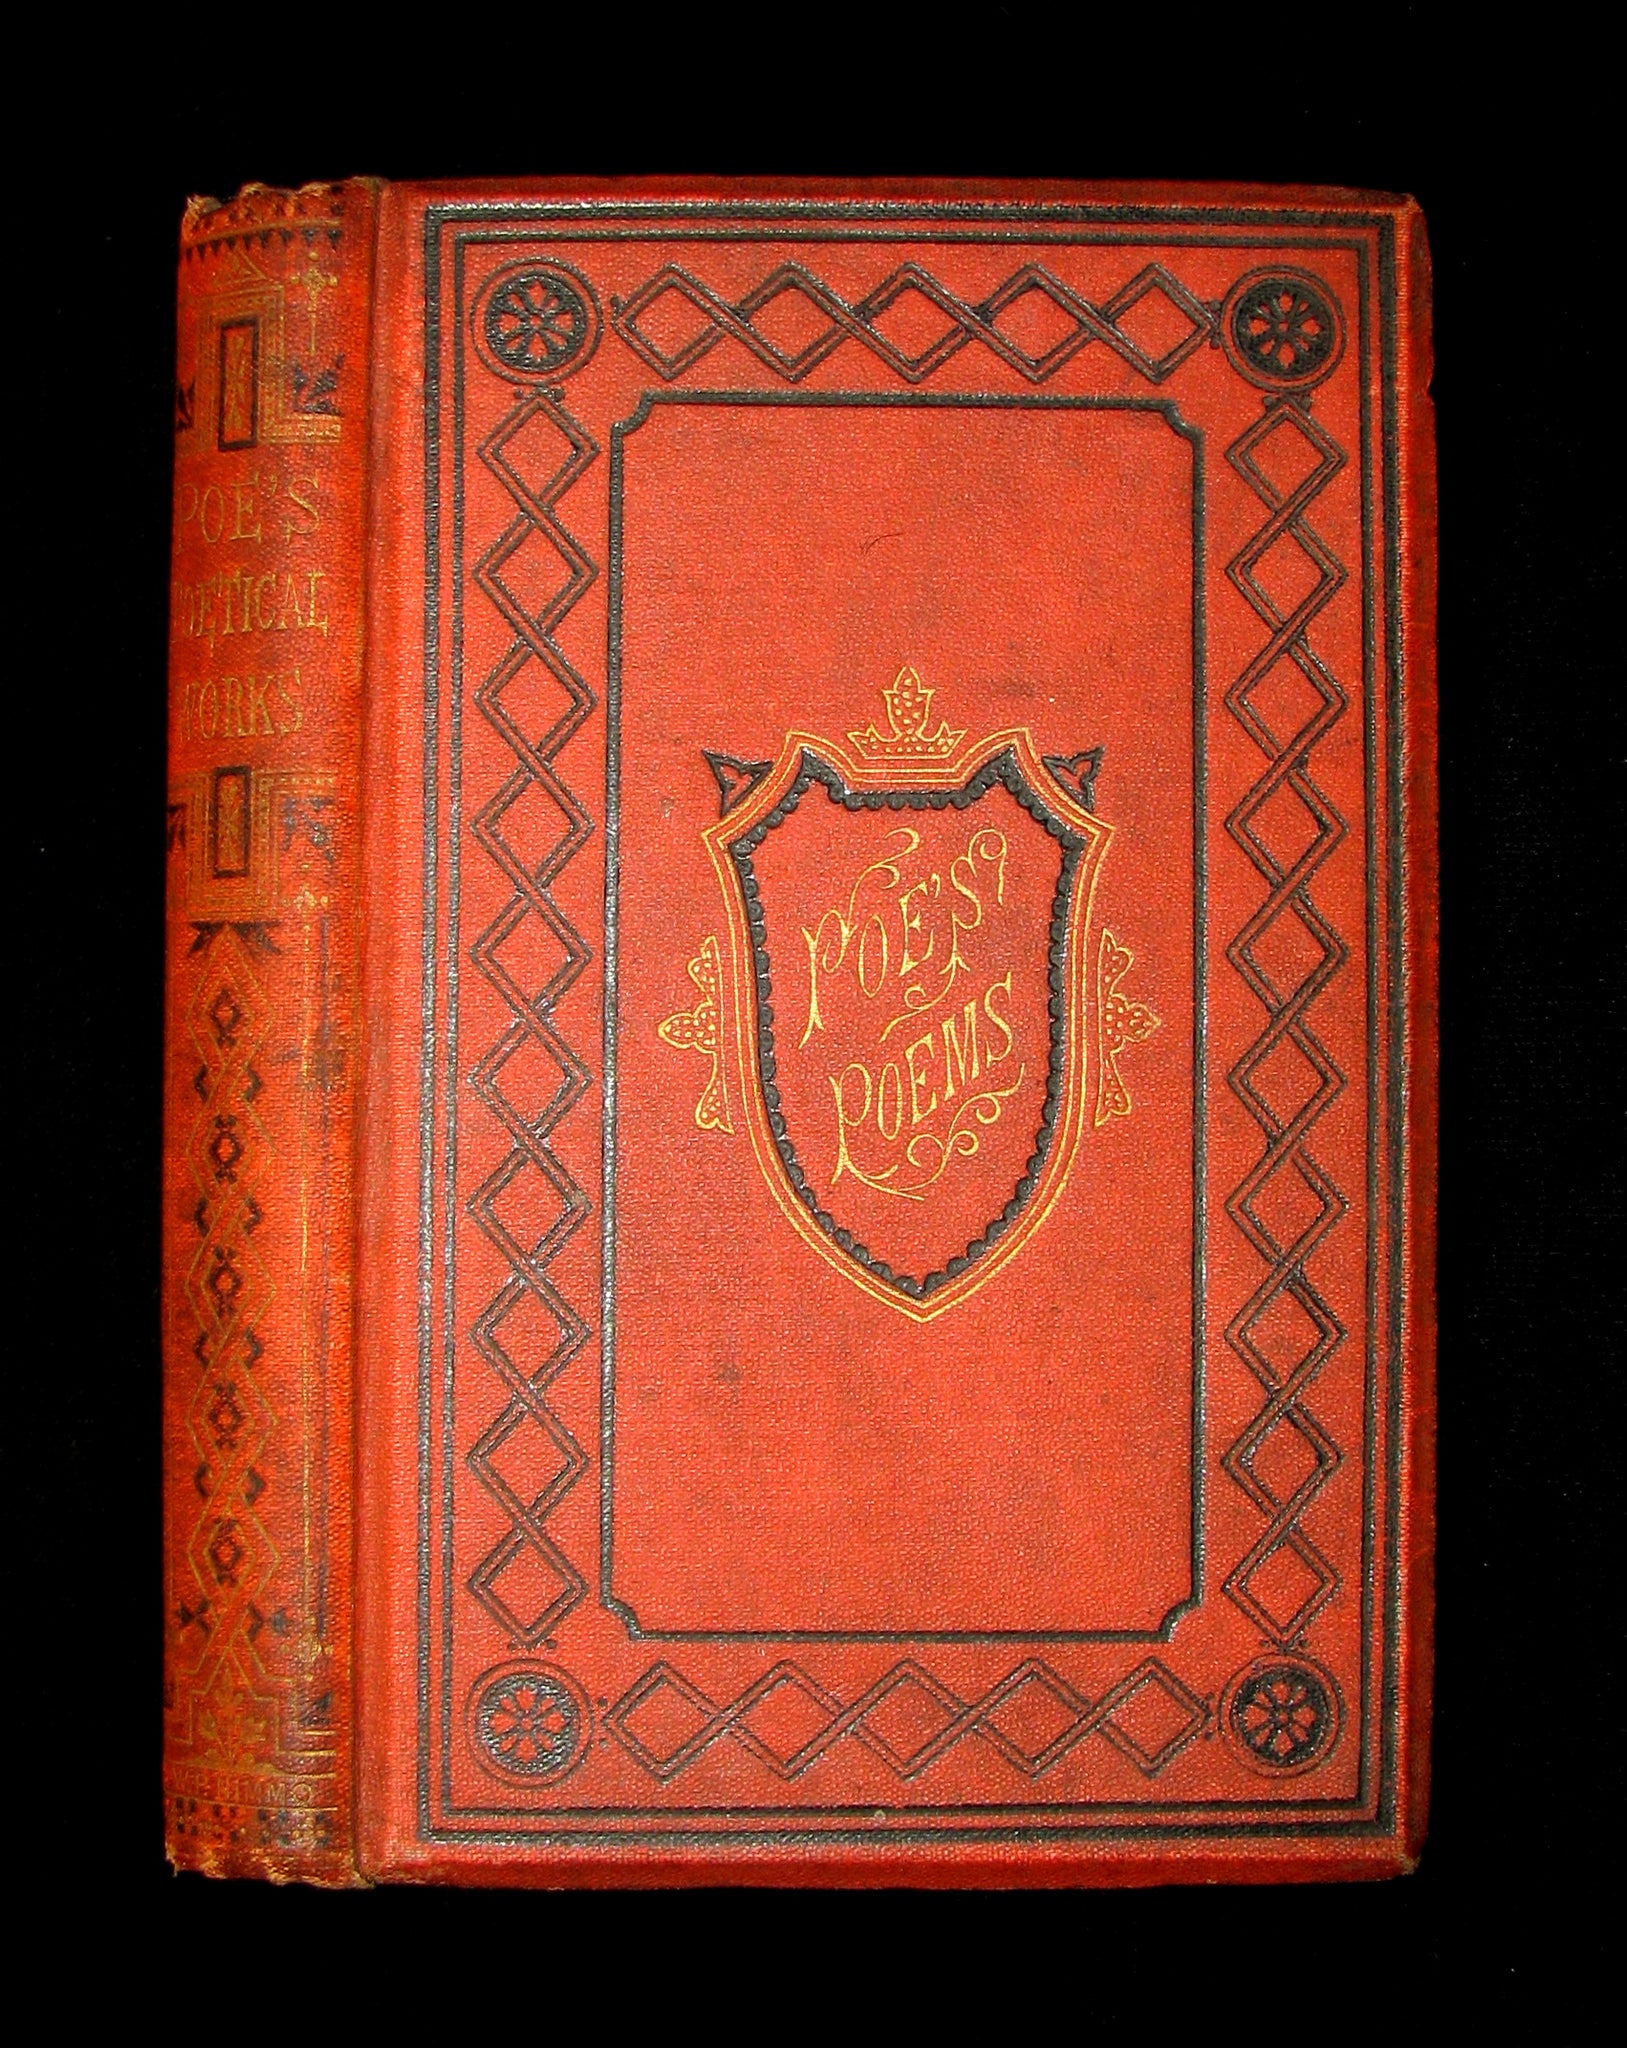 1873 Scarce Victorian Book - The Tall Student. A German Tale.